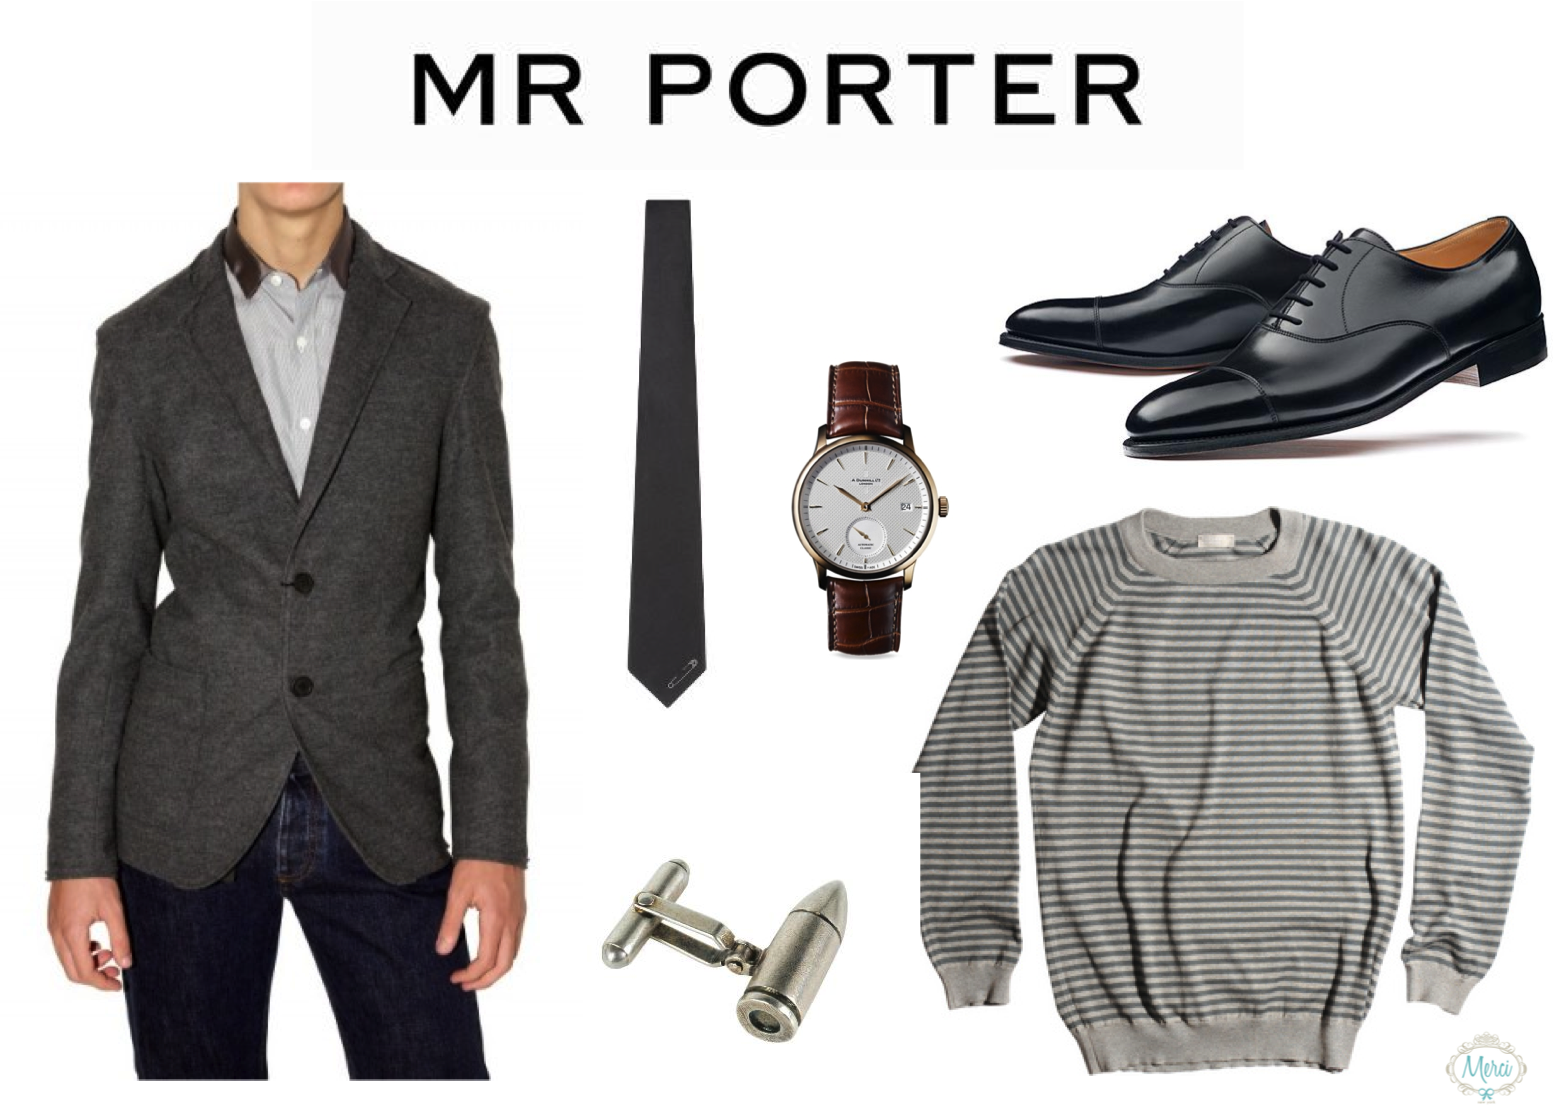 Style Buzz | Net-a-Porter Expands to Menswear | the wedding registry